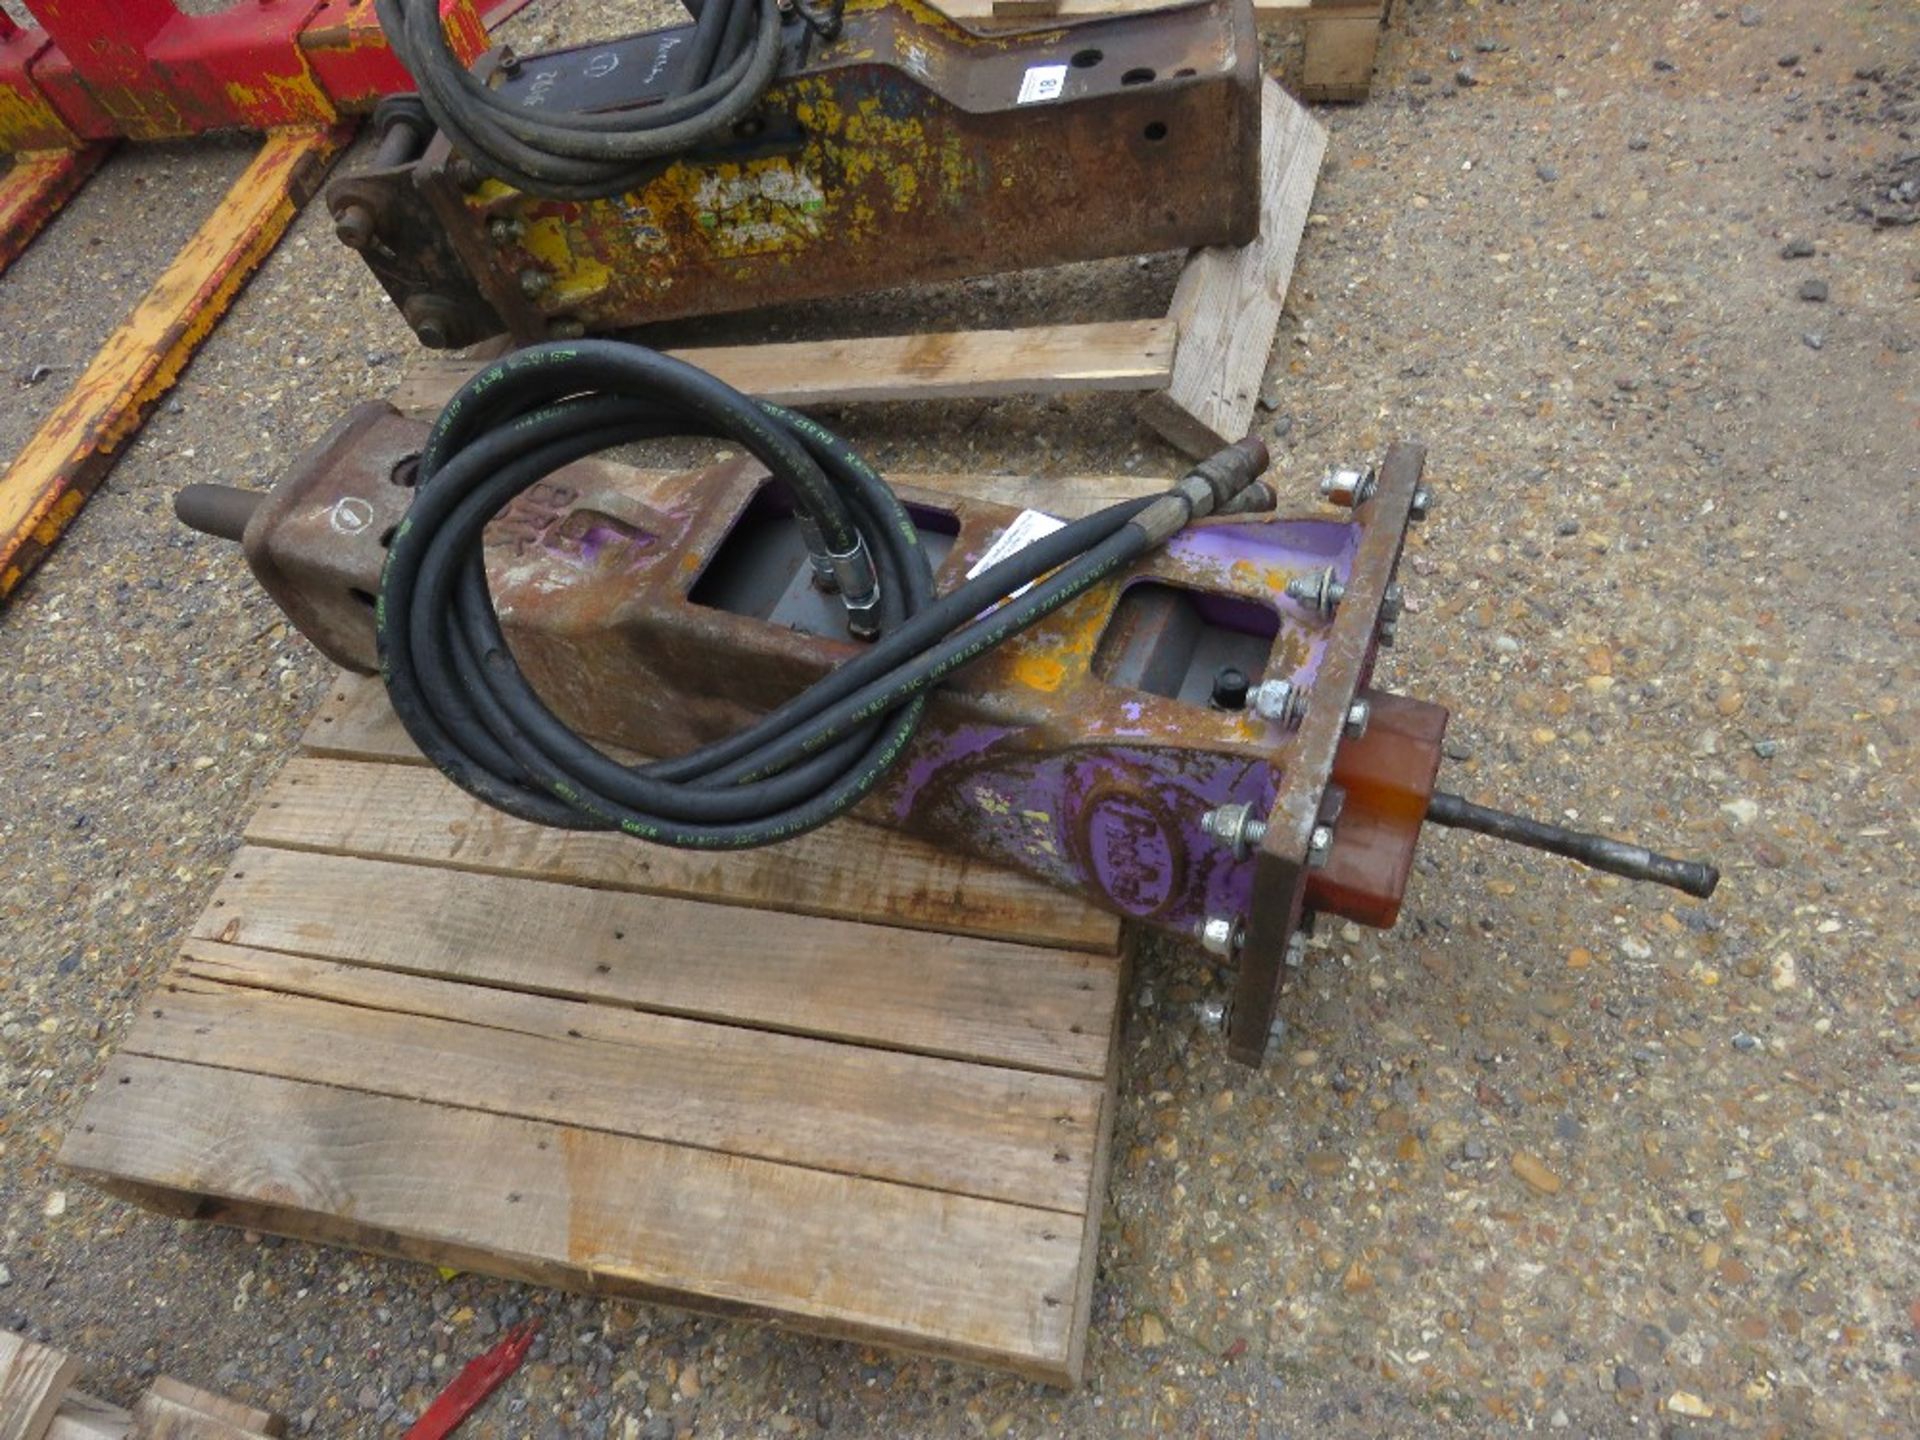 PRODEM PRB010 EXCVATOR MOUNTED HYDRAULIC BREAKER. NO HEADSTOCK. SUITABLE FOR 3 TONNE MACHINE APPROX. - Image 2 of 3